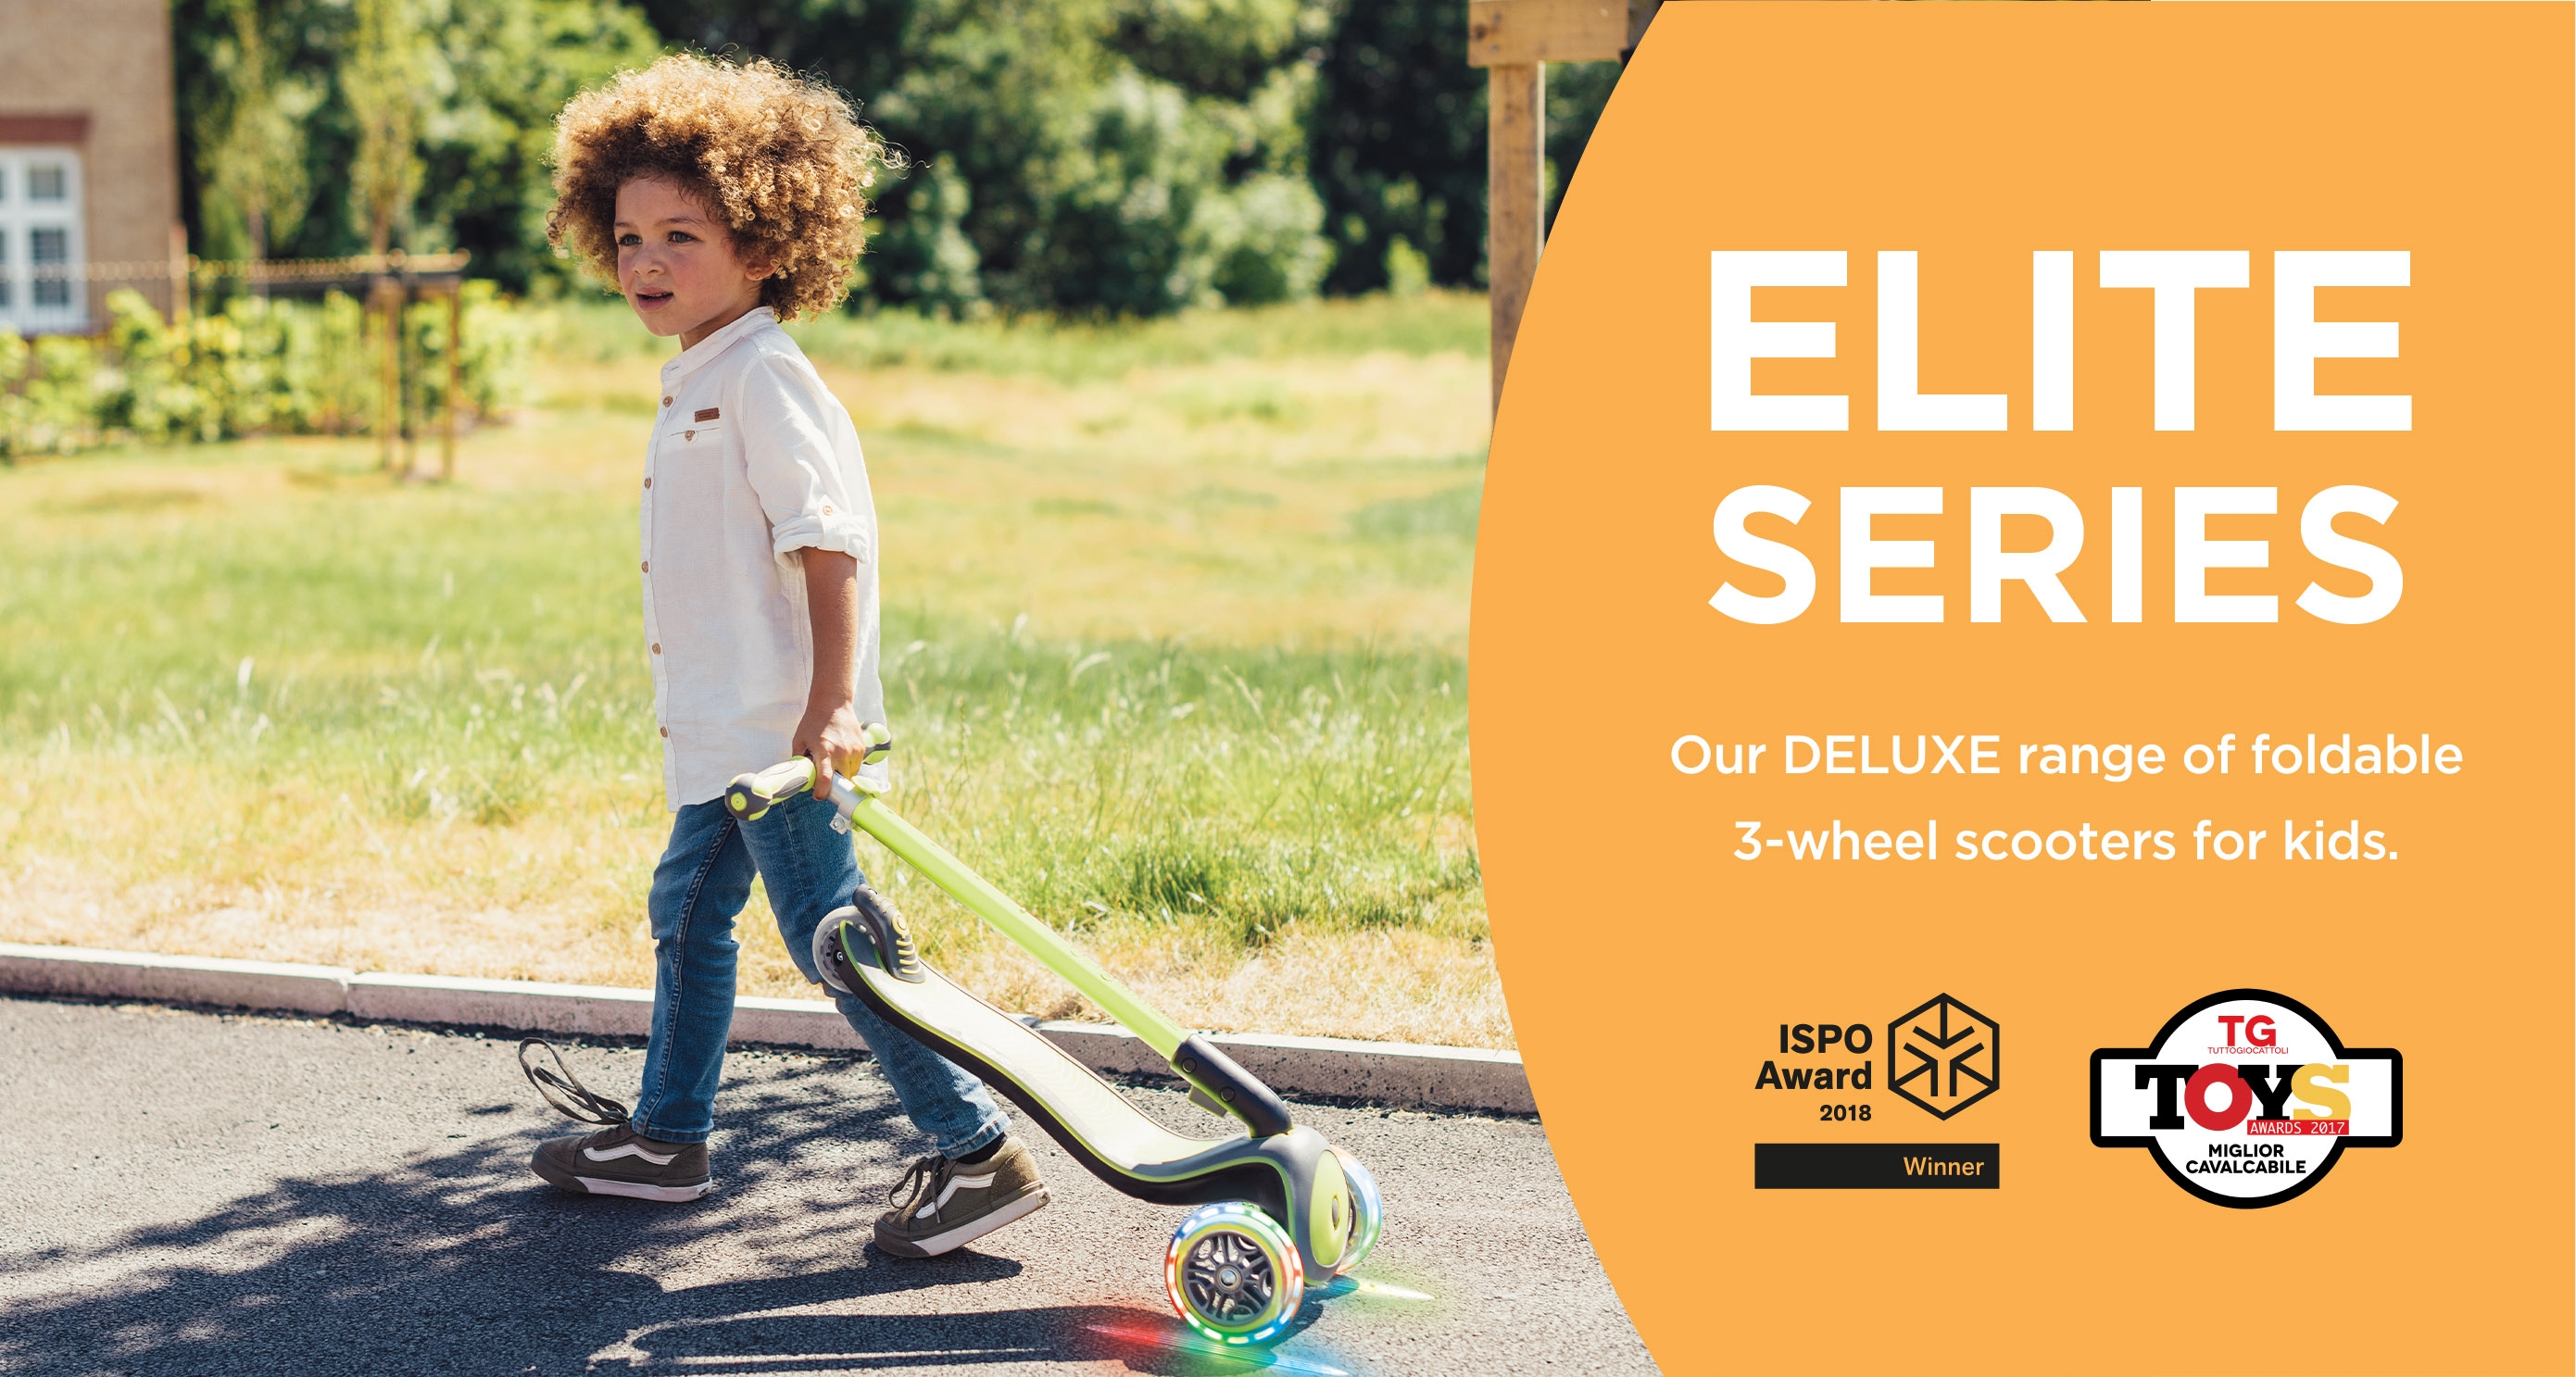 Our DELUXE range of foldable 3-wheel scooters for kids. 